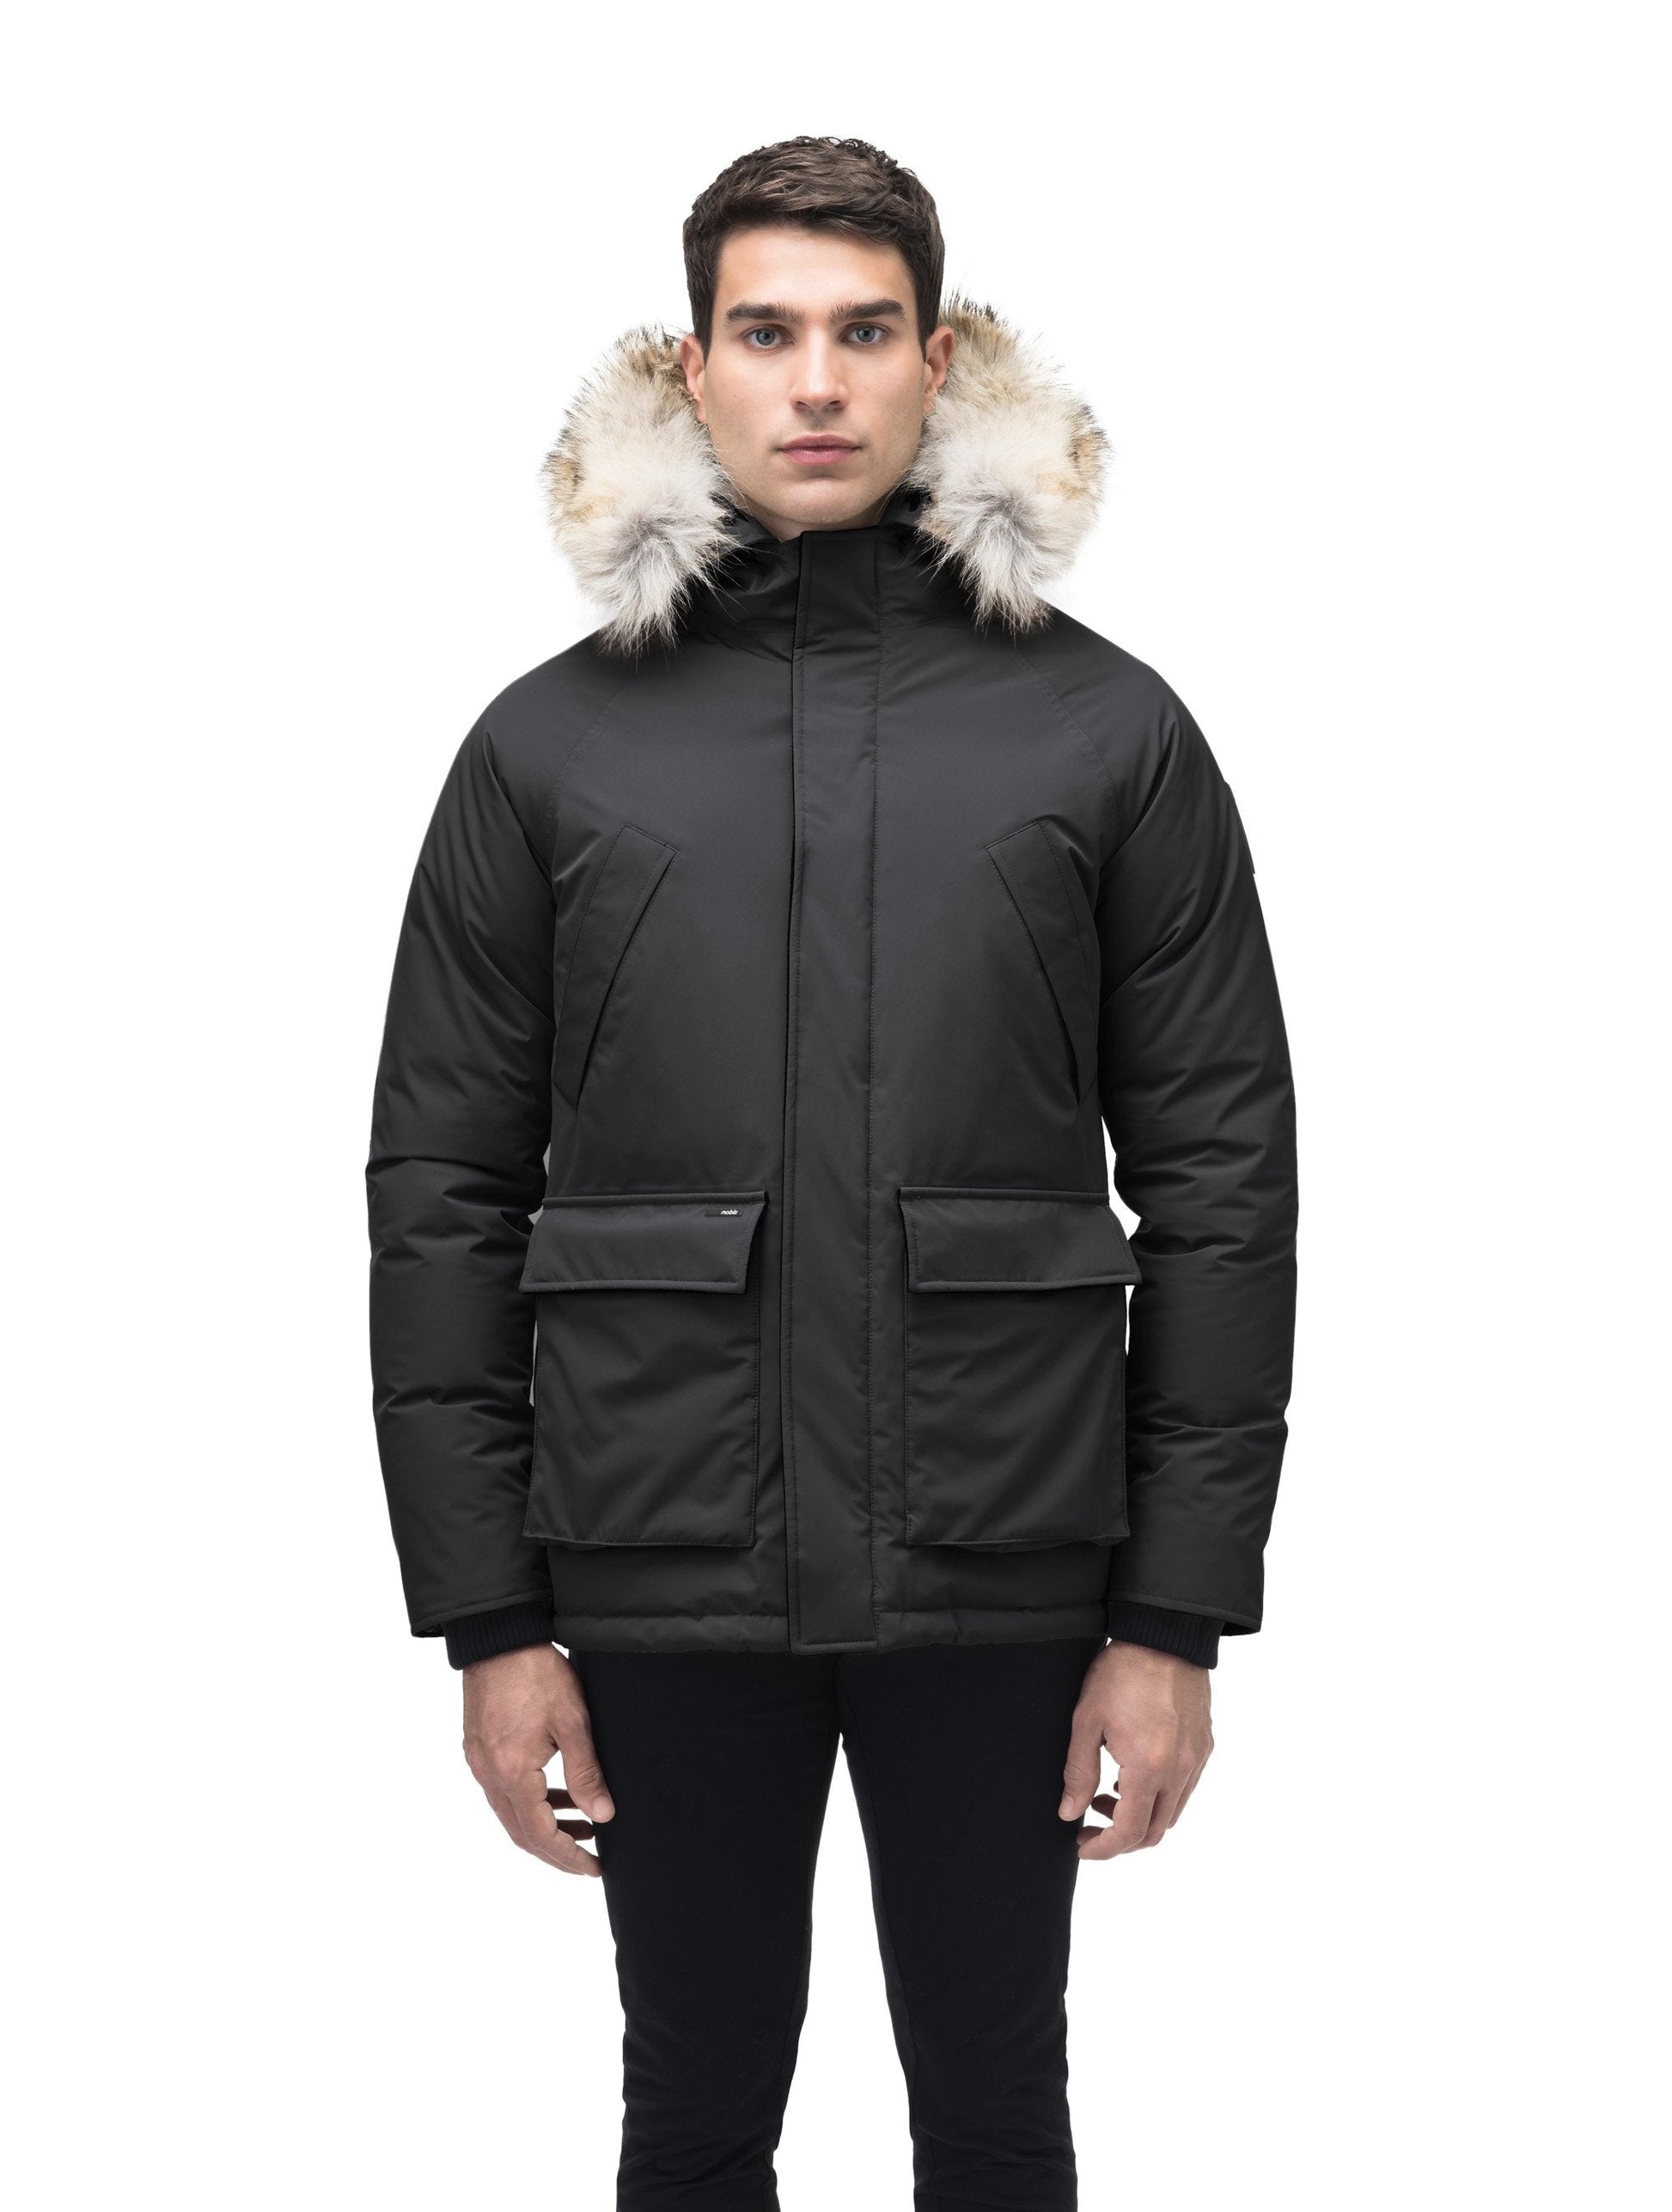 Men's waist length down filled jacket with two front pockets with magnetic closure and a removable fur trim on the hood in Cy Black